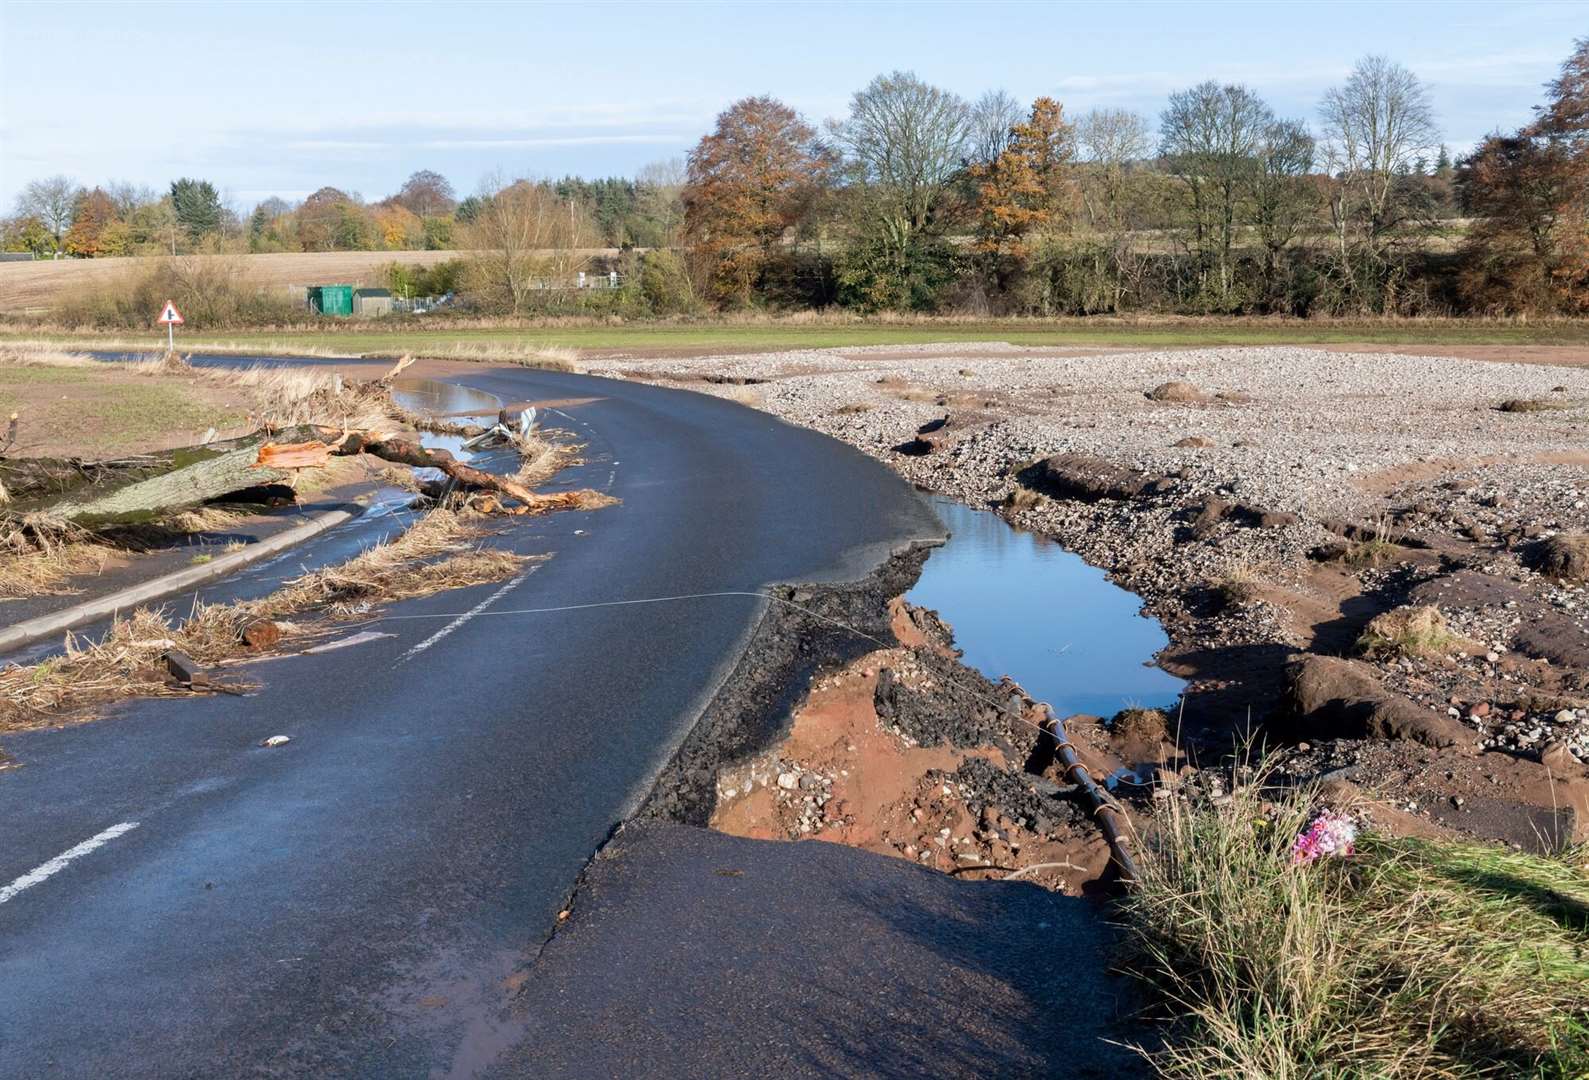 The A937 road at Marykirk was destroyed during Storm Babet.